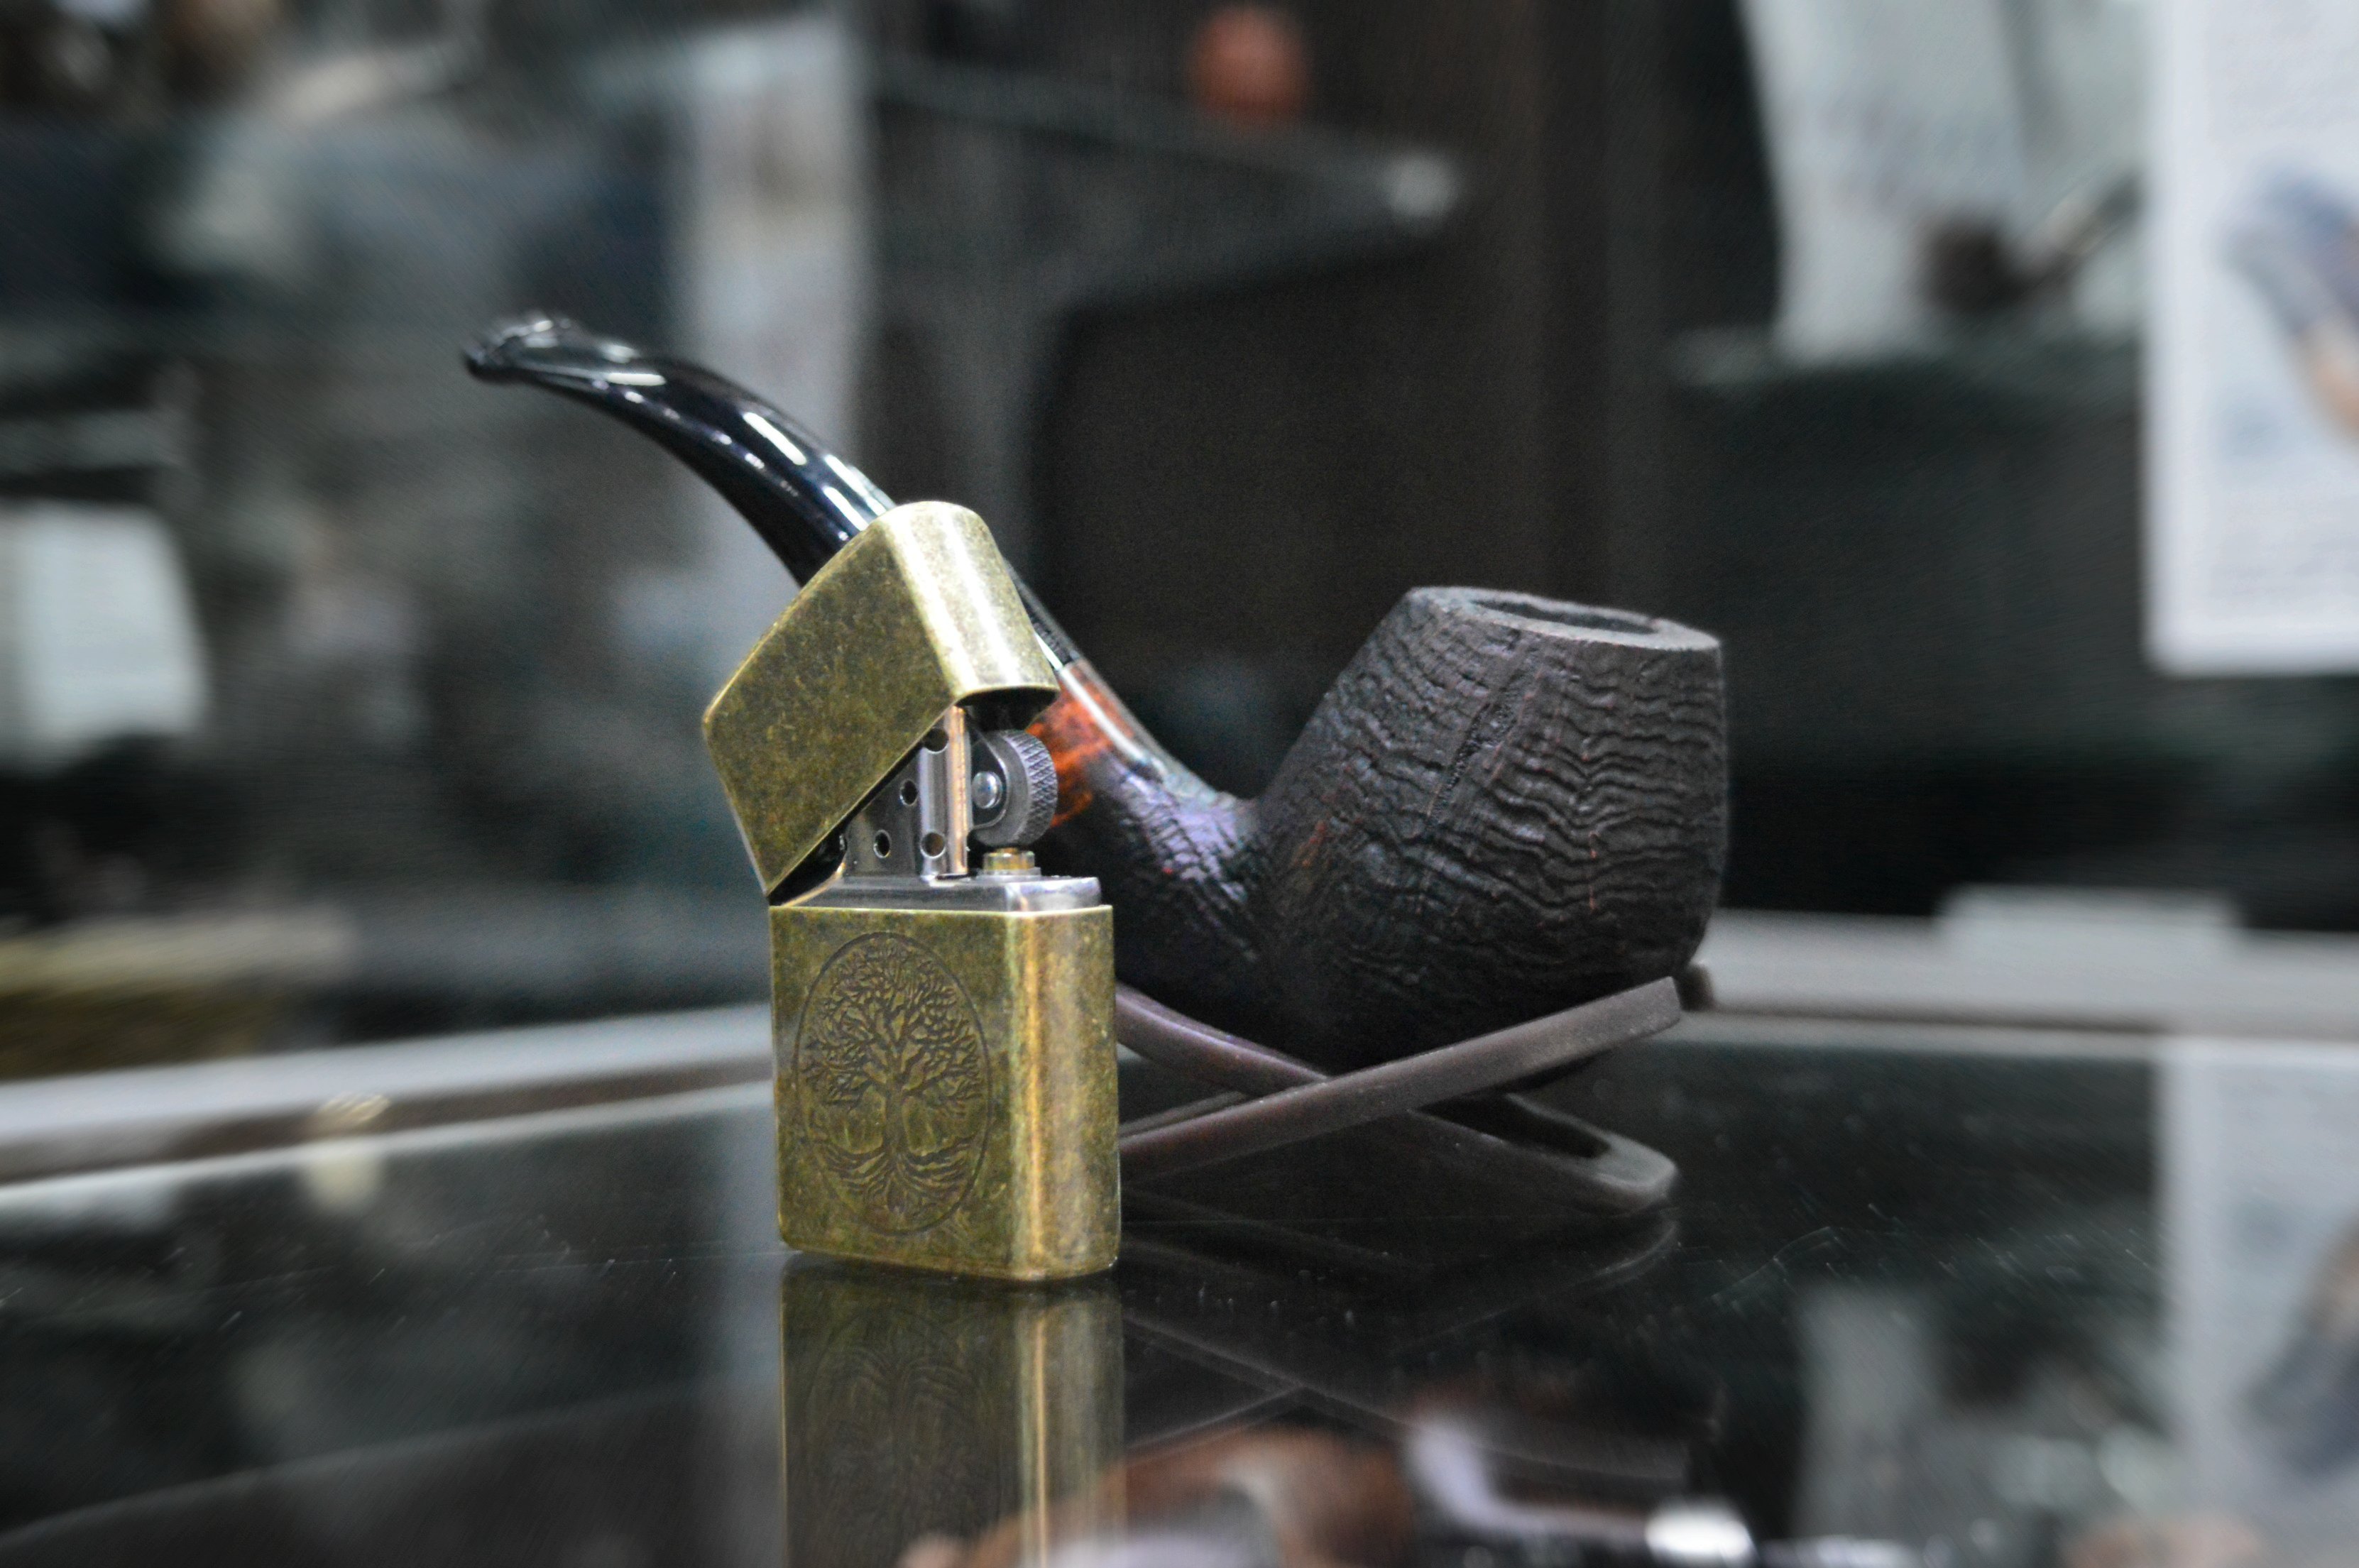 Fathers Day gift idea - Pipe + lighter